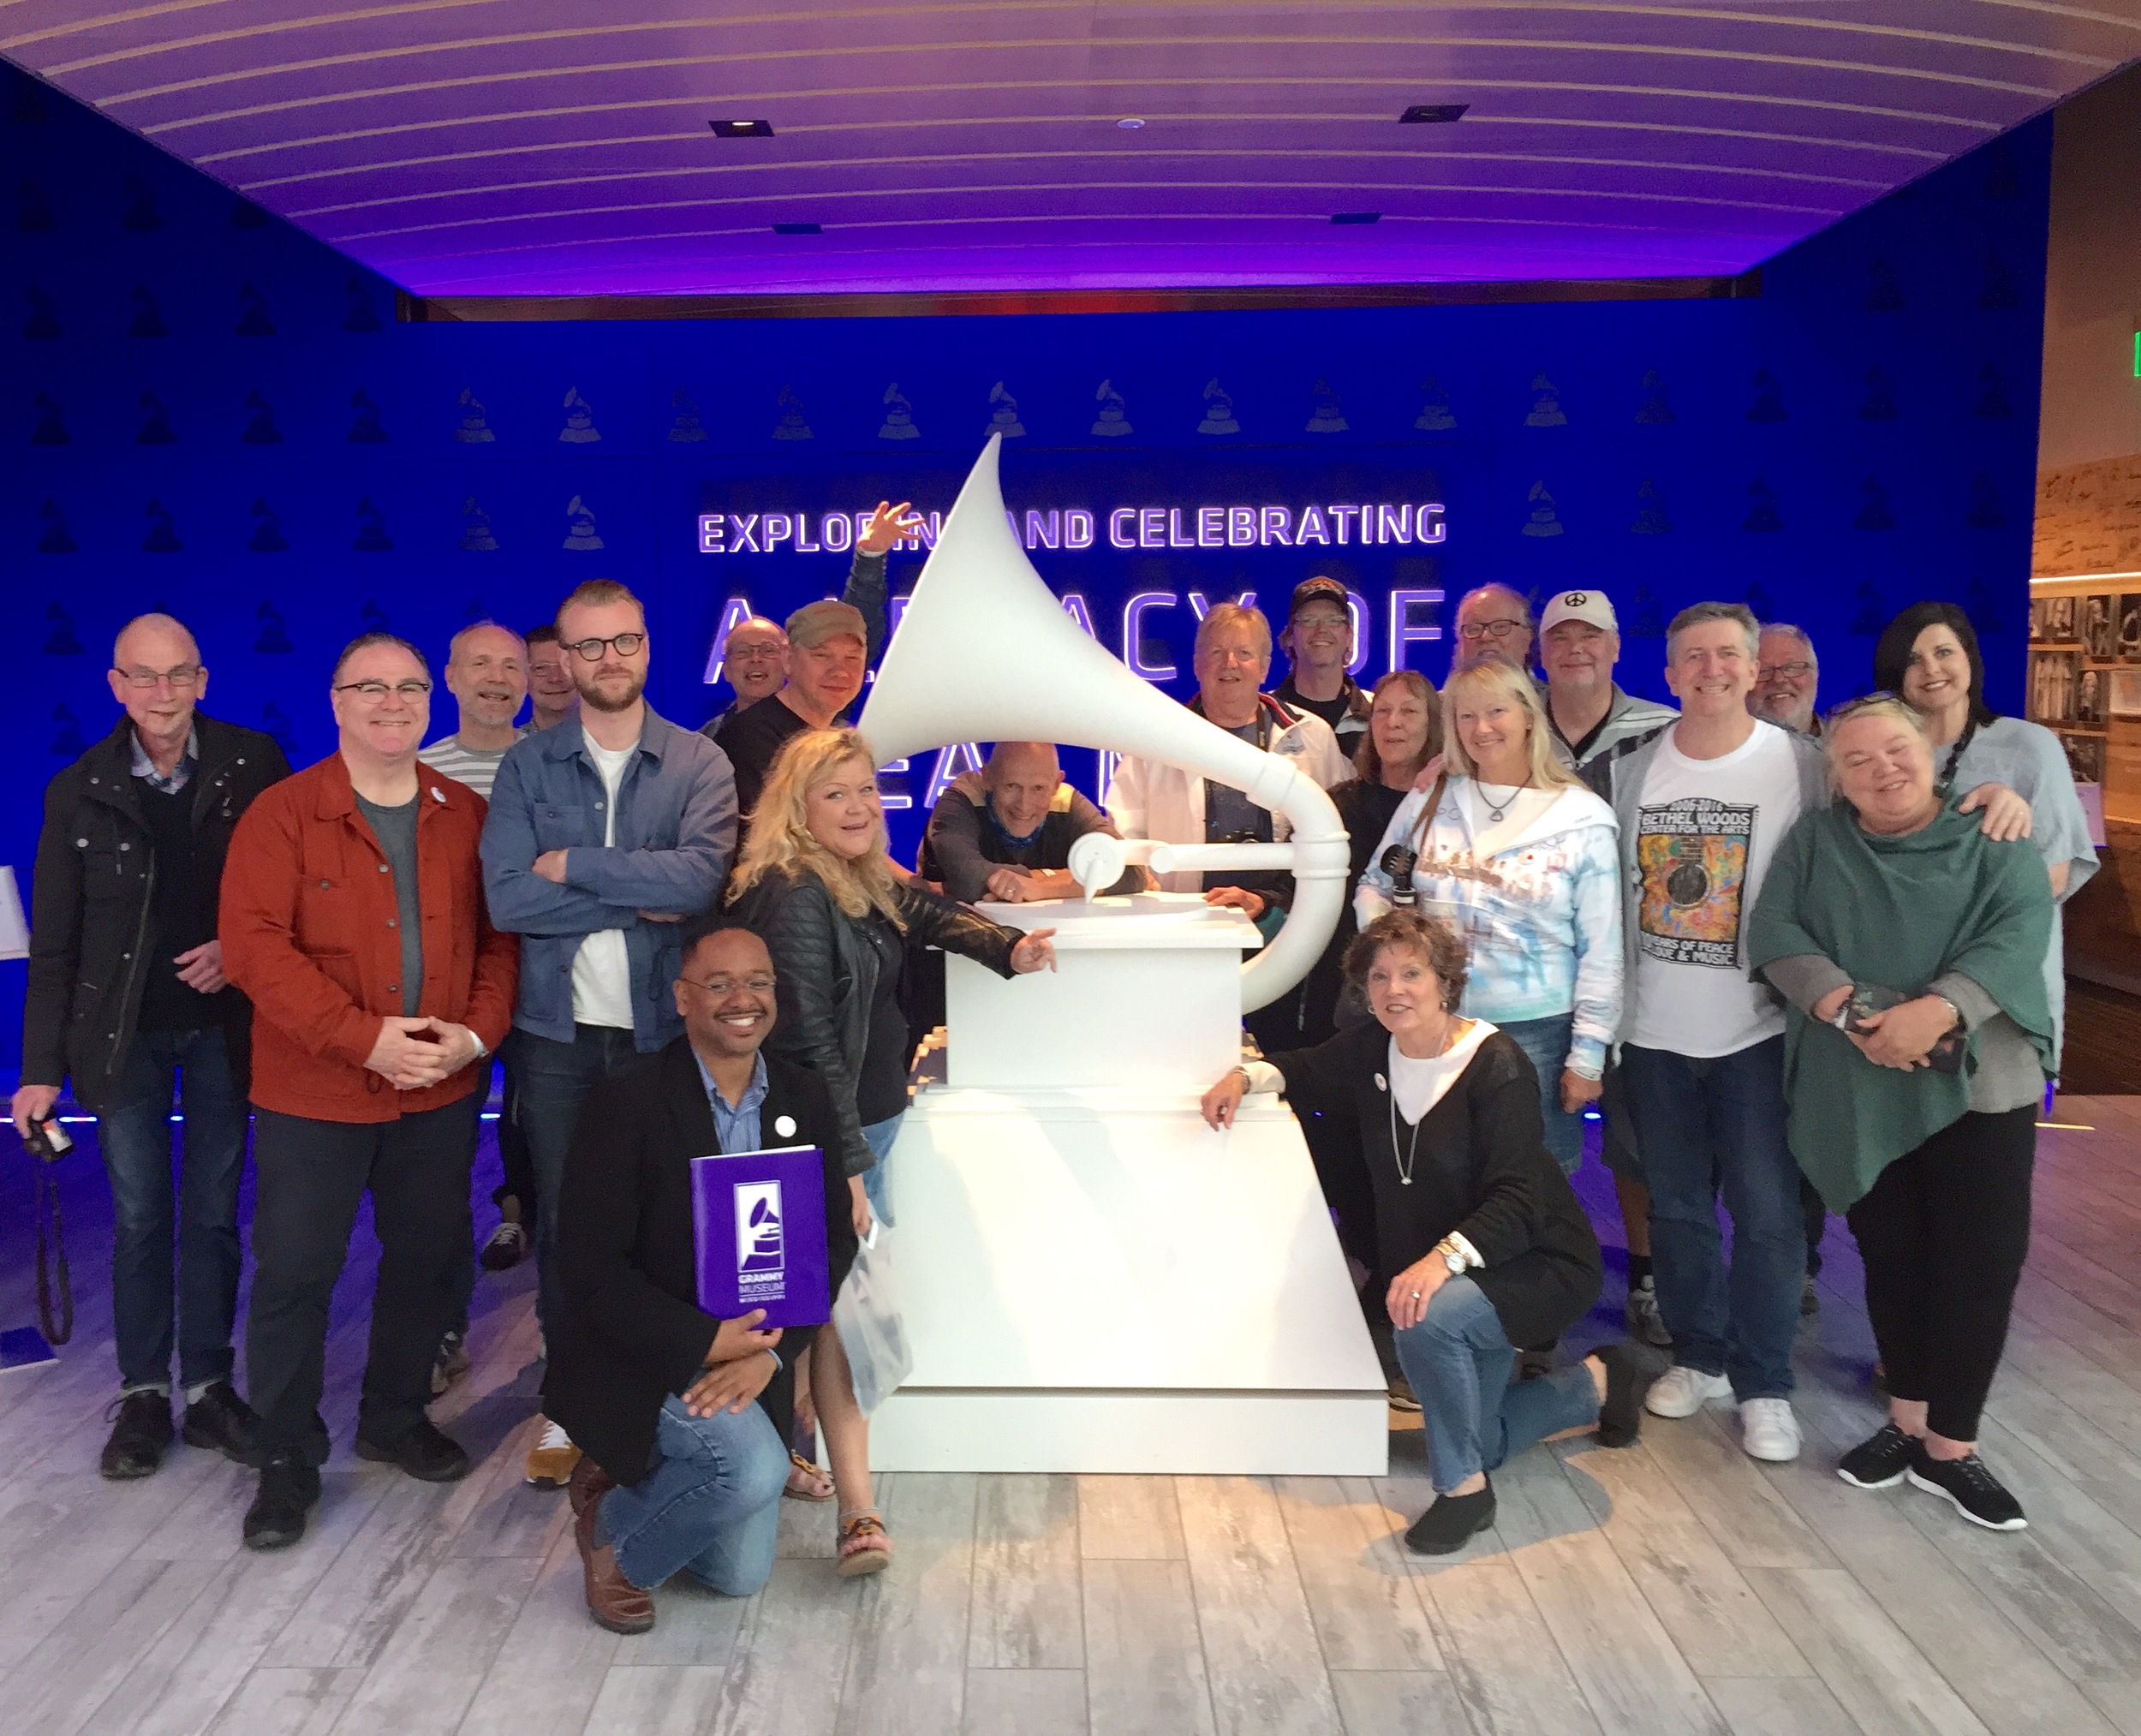  A giant replica of the GRAMMY award greets visitors at the entrance of the new museum in Cleveland, and the group of travelers from Sweden takes advantage of the iconic symbol for a group photo. Joining the tour are Dr. Rolando Herts (bottom left), 